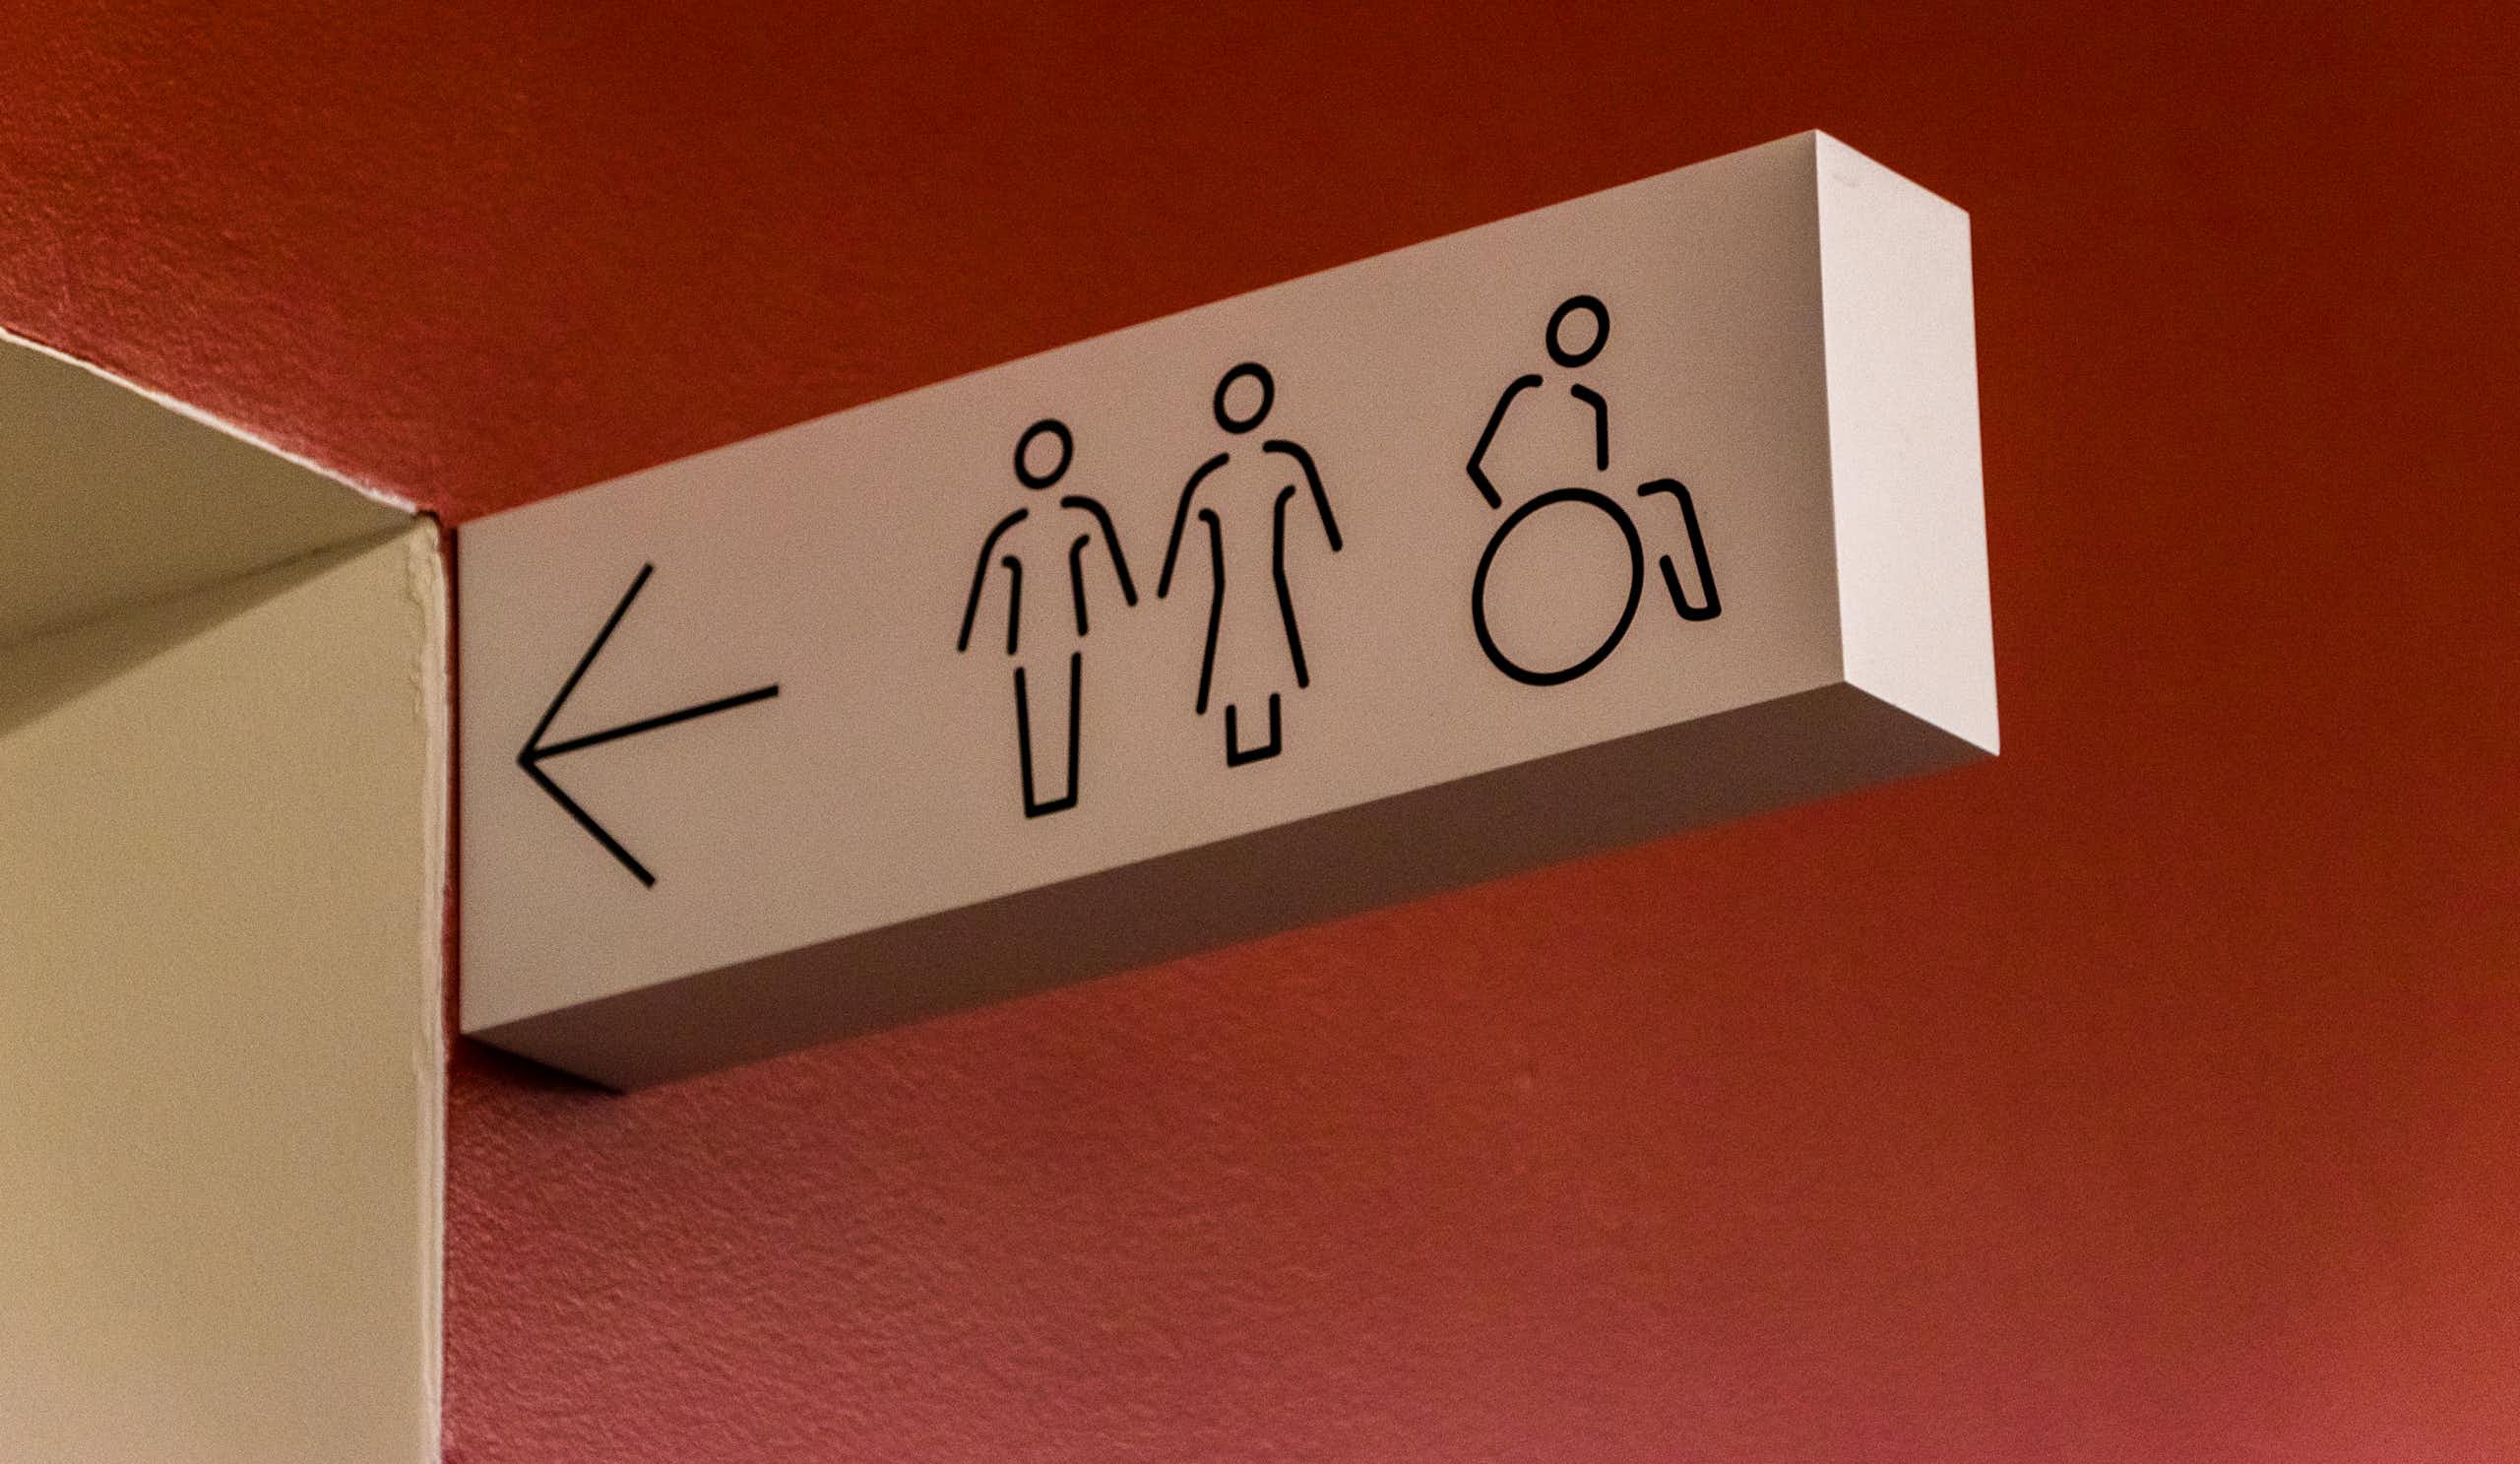 A sign pointing towards men's, women's and disabled restrooms